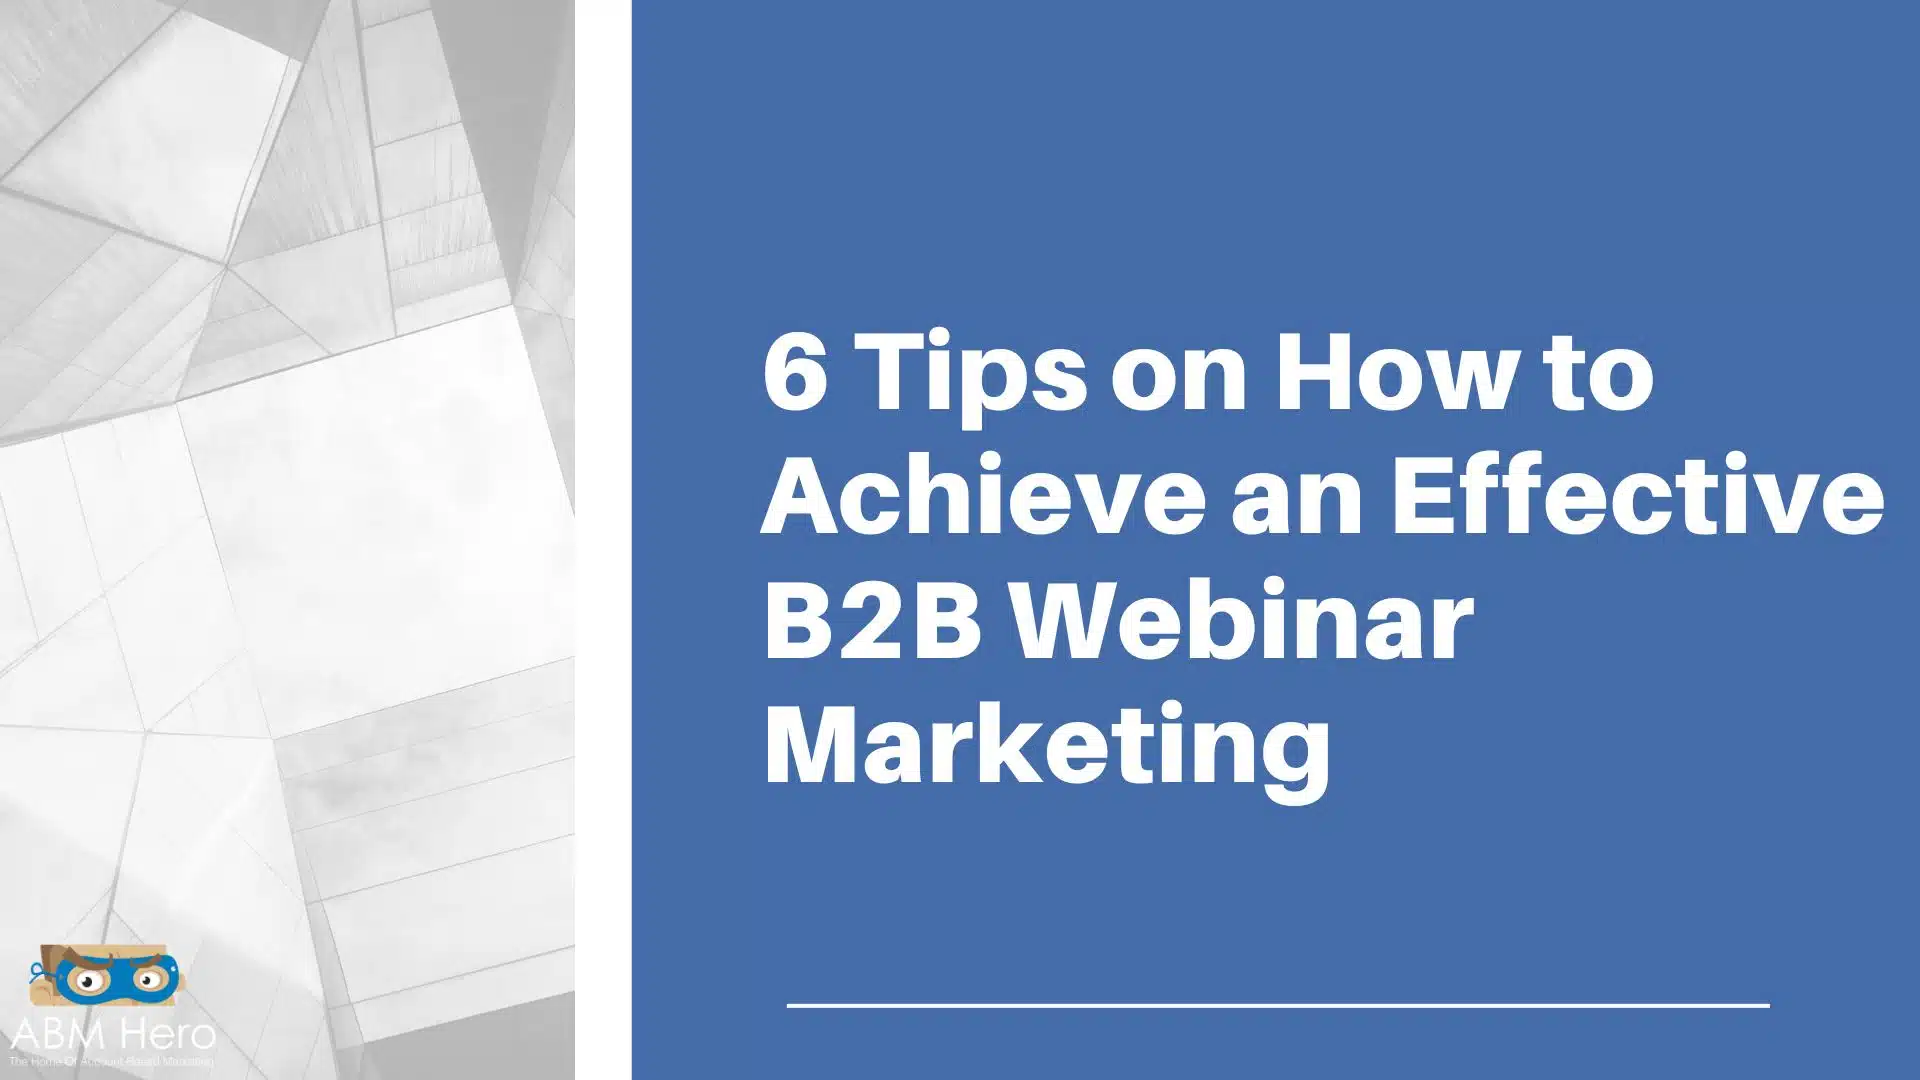 You are currently viewing 6 Tips on How to Achieve an Effective B2B Webinar Marketing